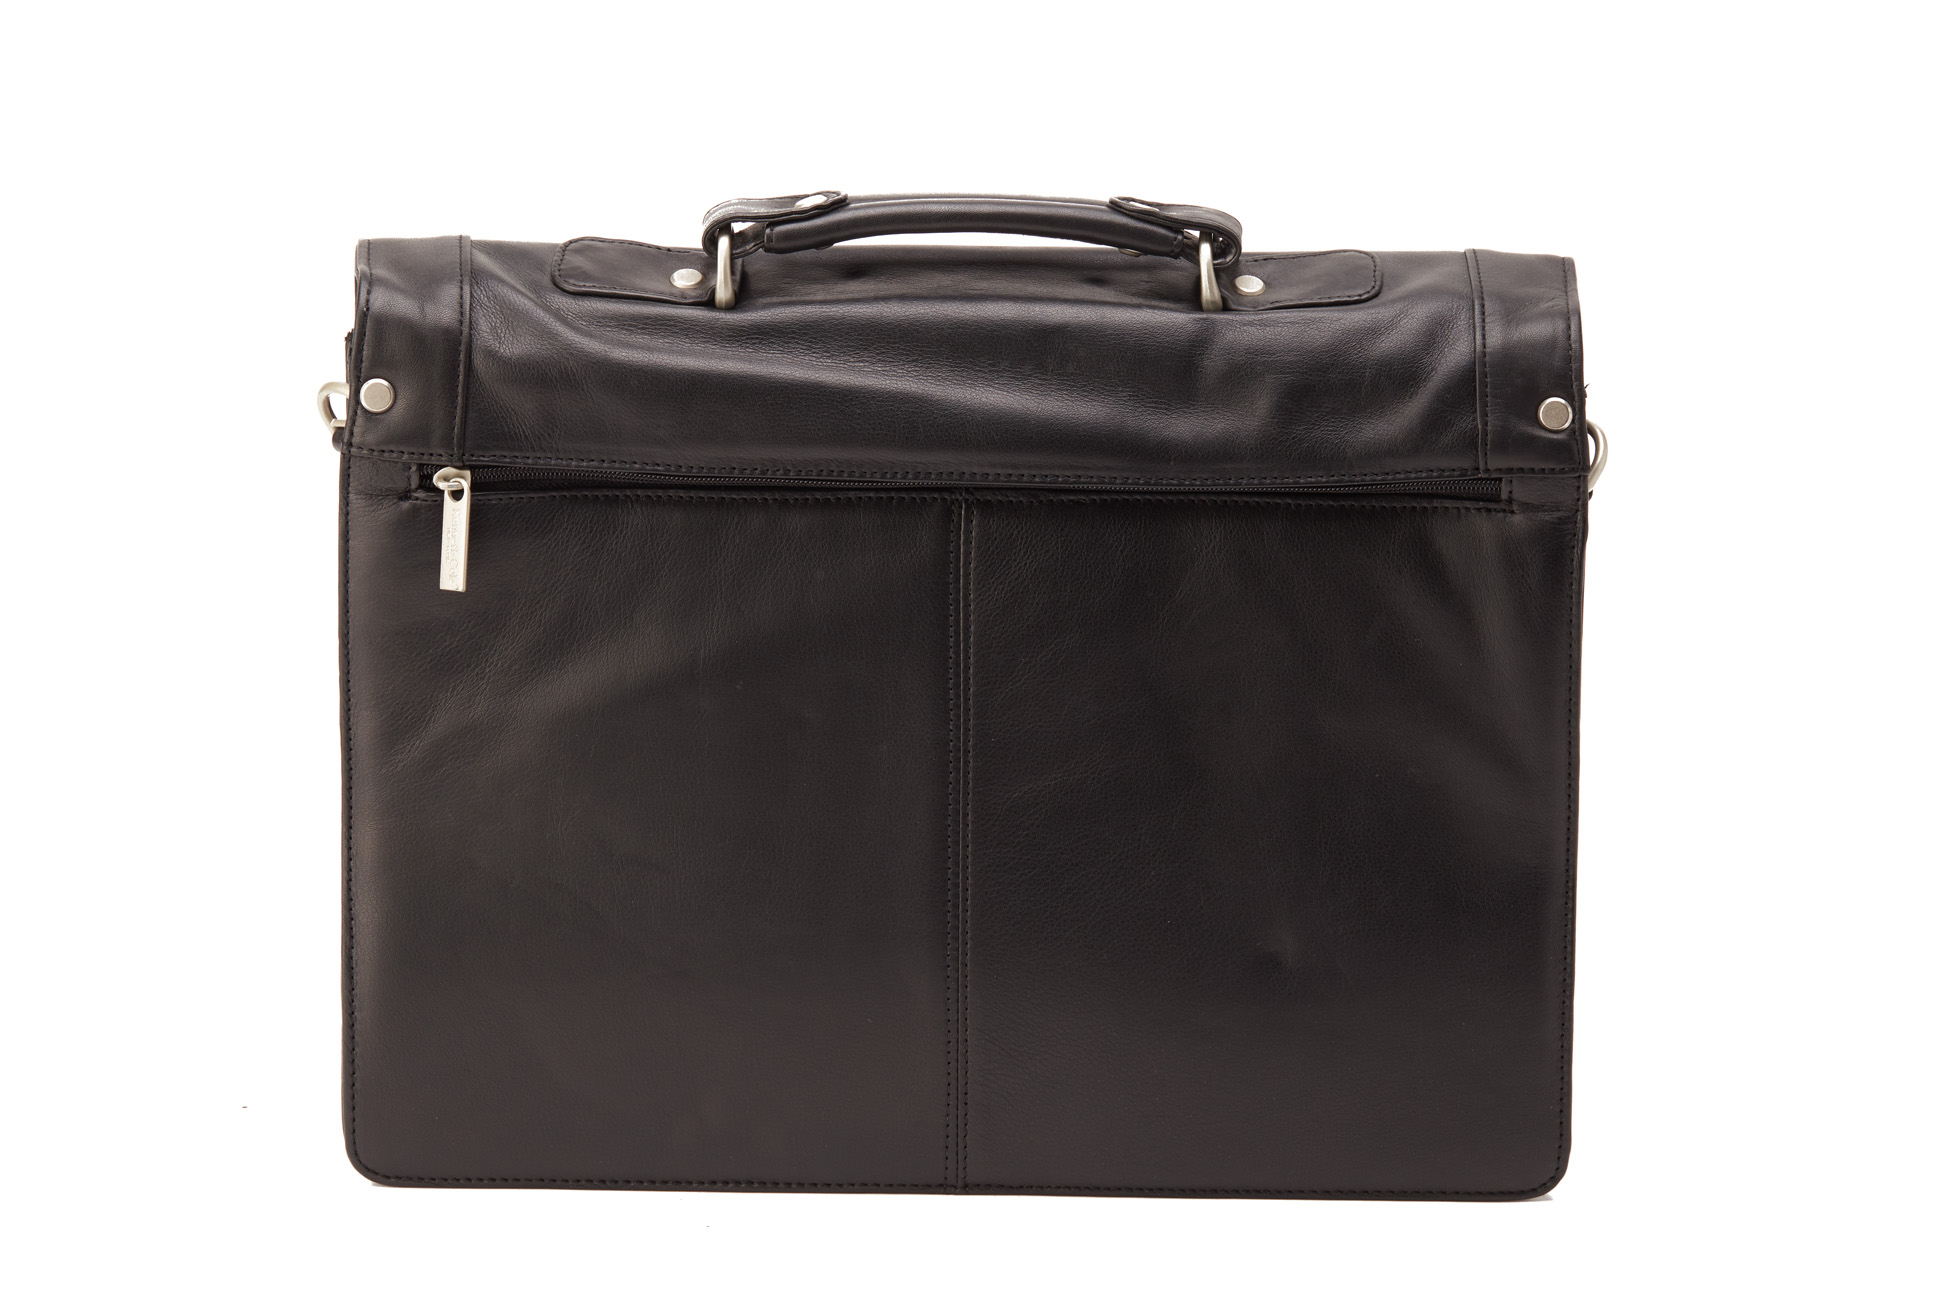 A KENNETH COLE BLACK LEATHER BRIEFCASE - Image 3 of 4